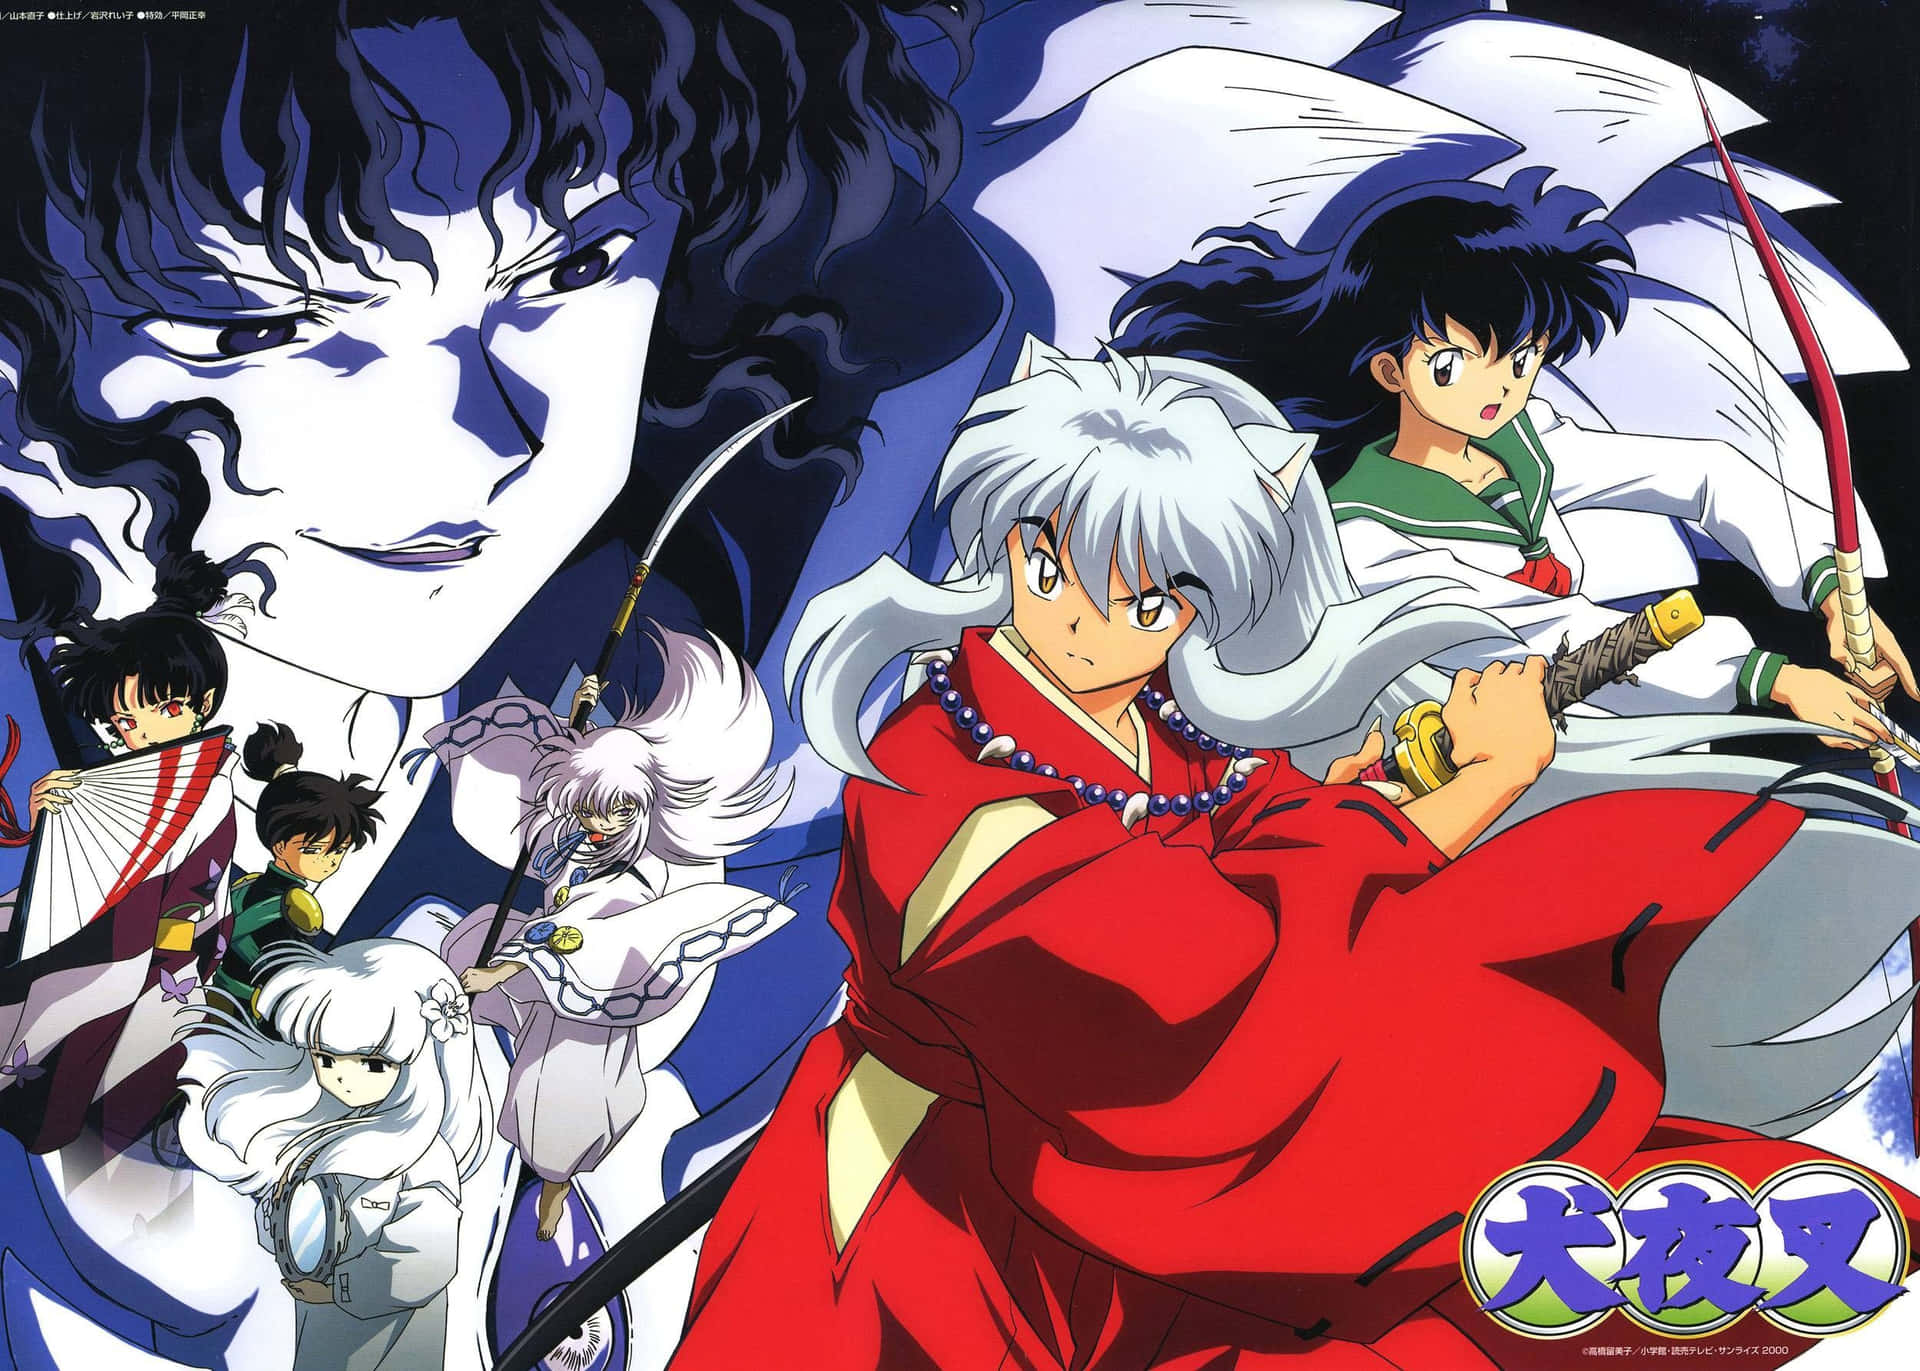 Explore the Epic World of Inuyasha with 4K Resolution Wallpaper